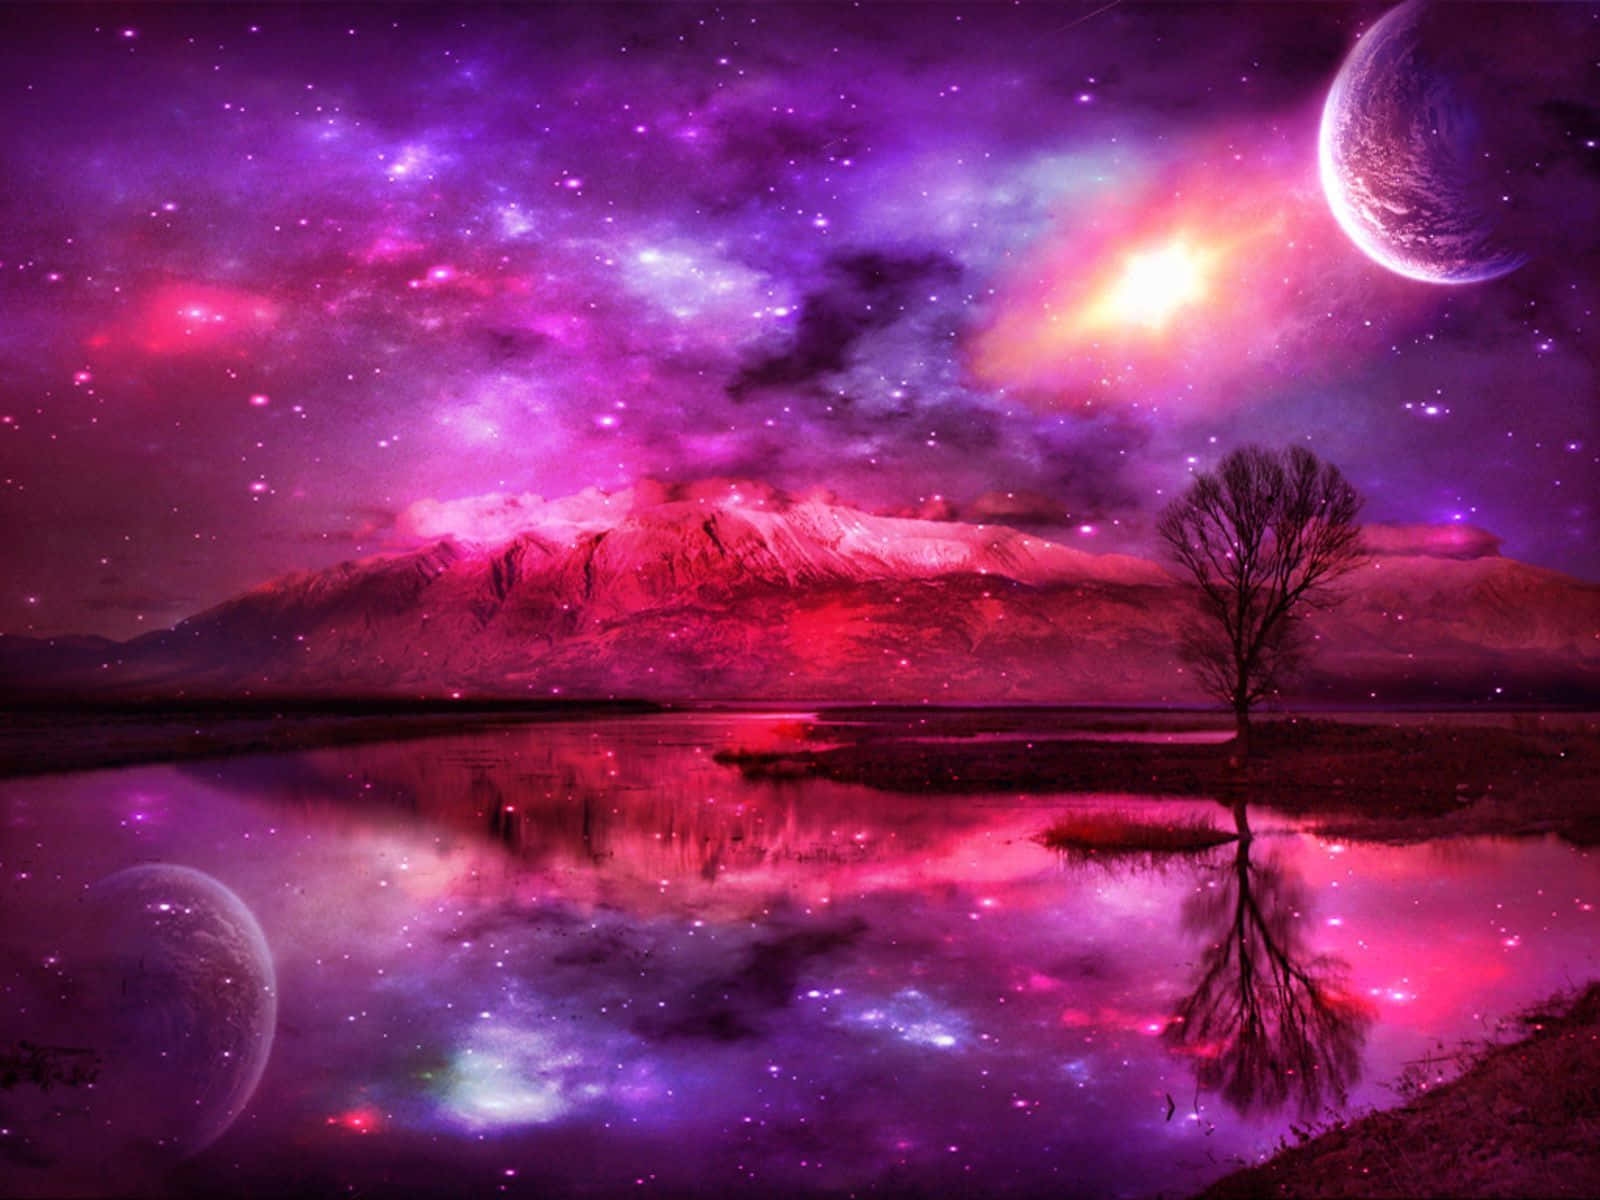 A dazzling display of pink and purple stars in a galaxy. Wallpaper